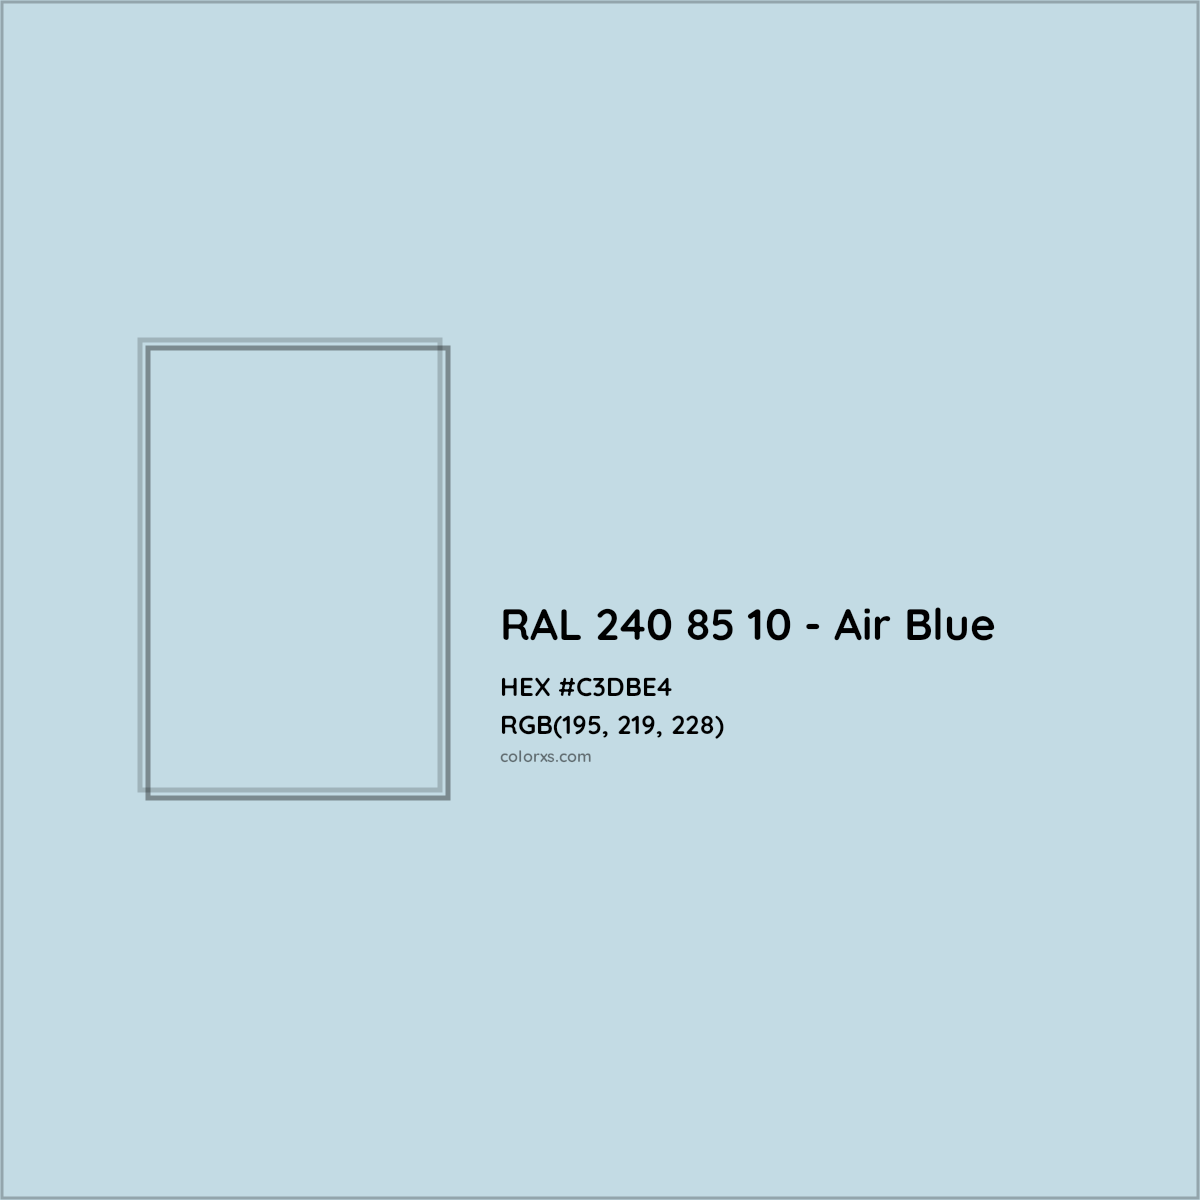 HEX #C3DBE4 RAL 240 85 10 - Air Blue CMS RAL Design - Color Code